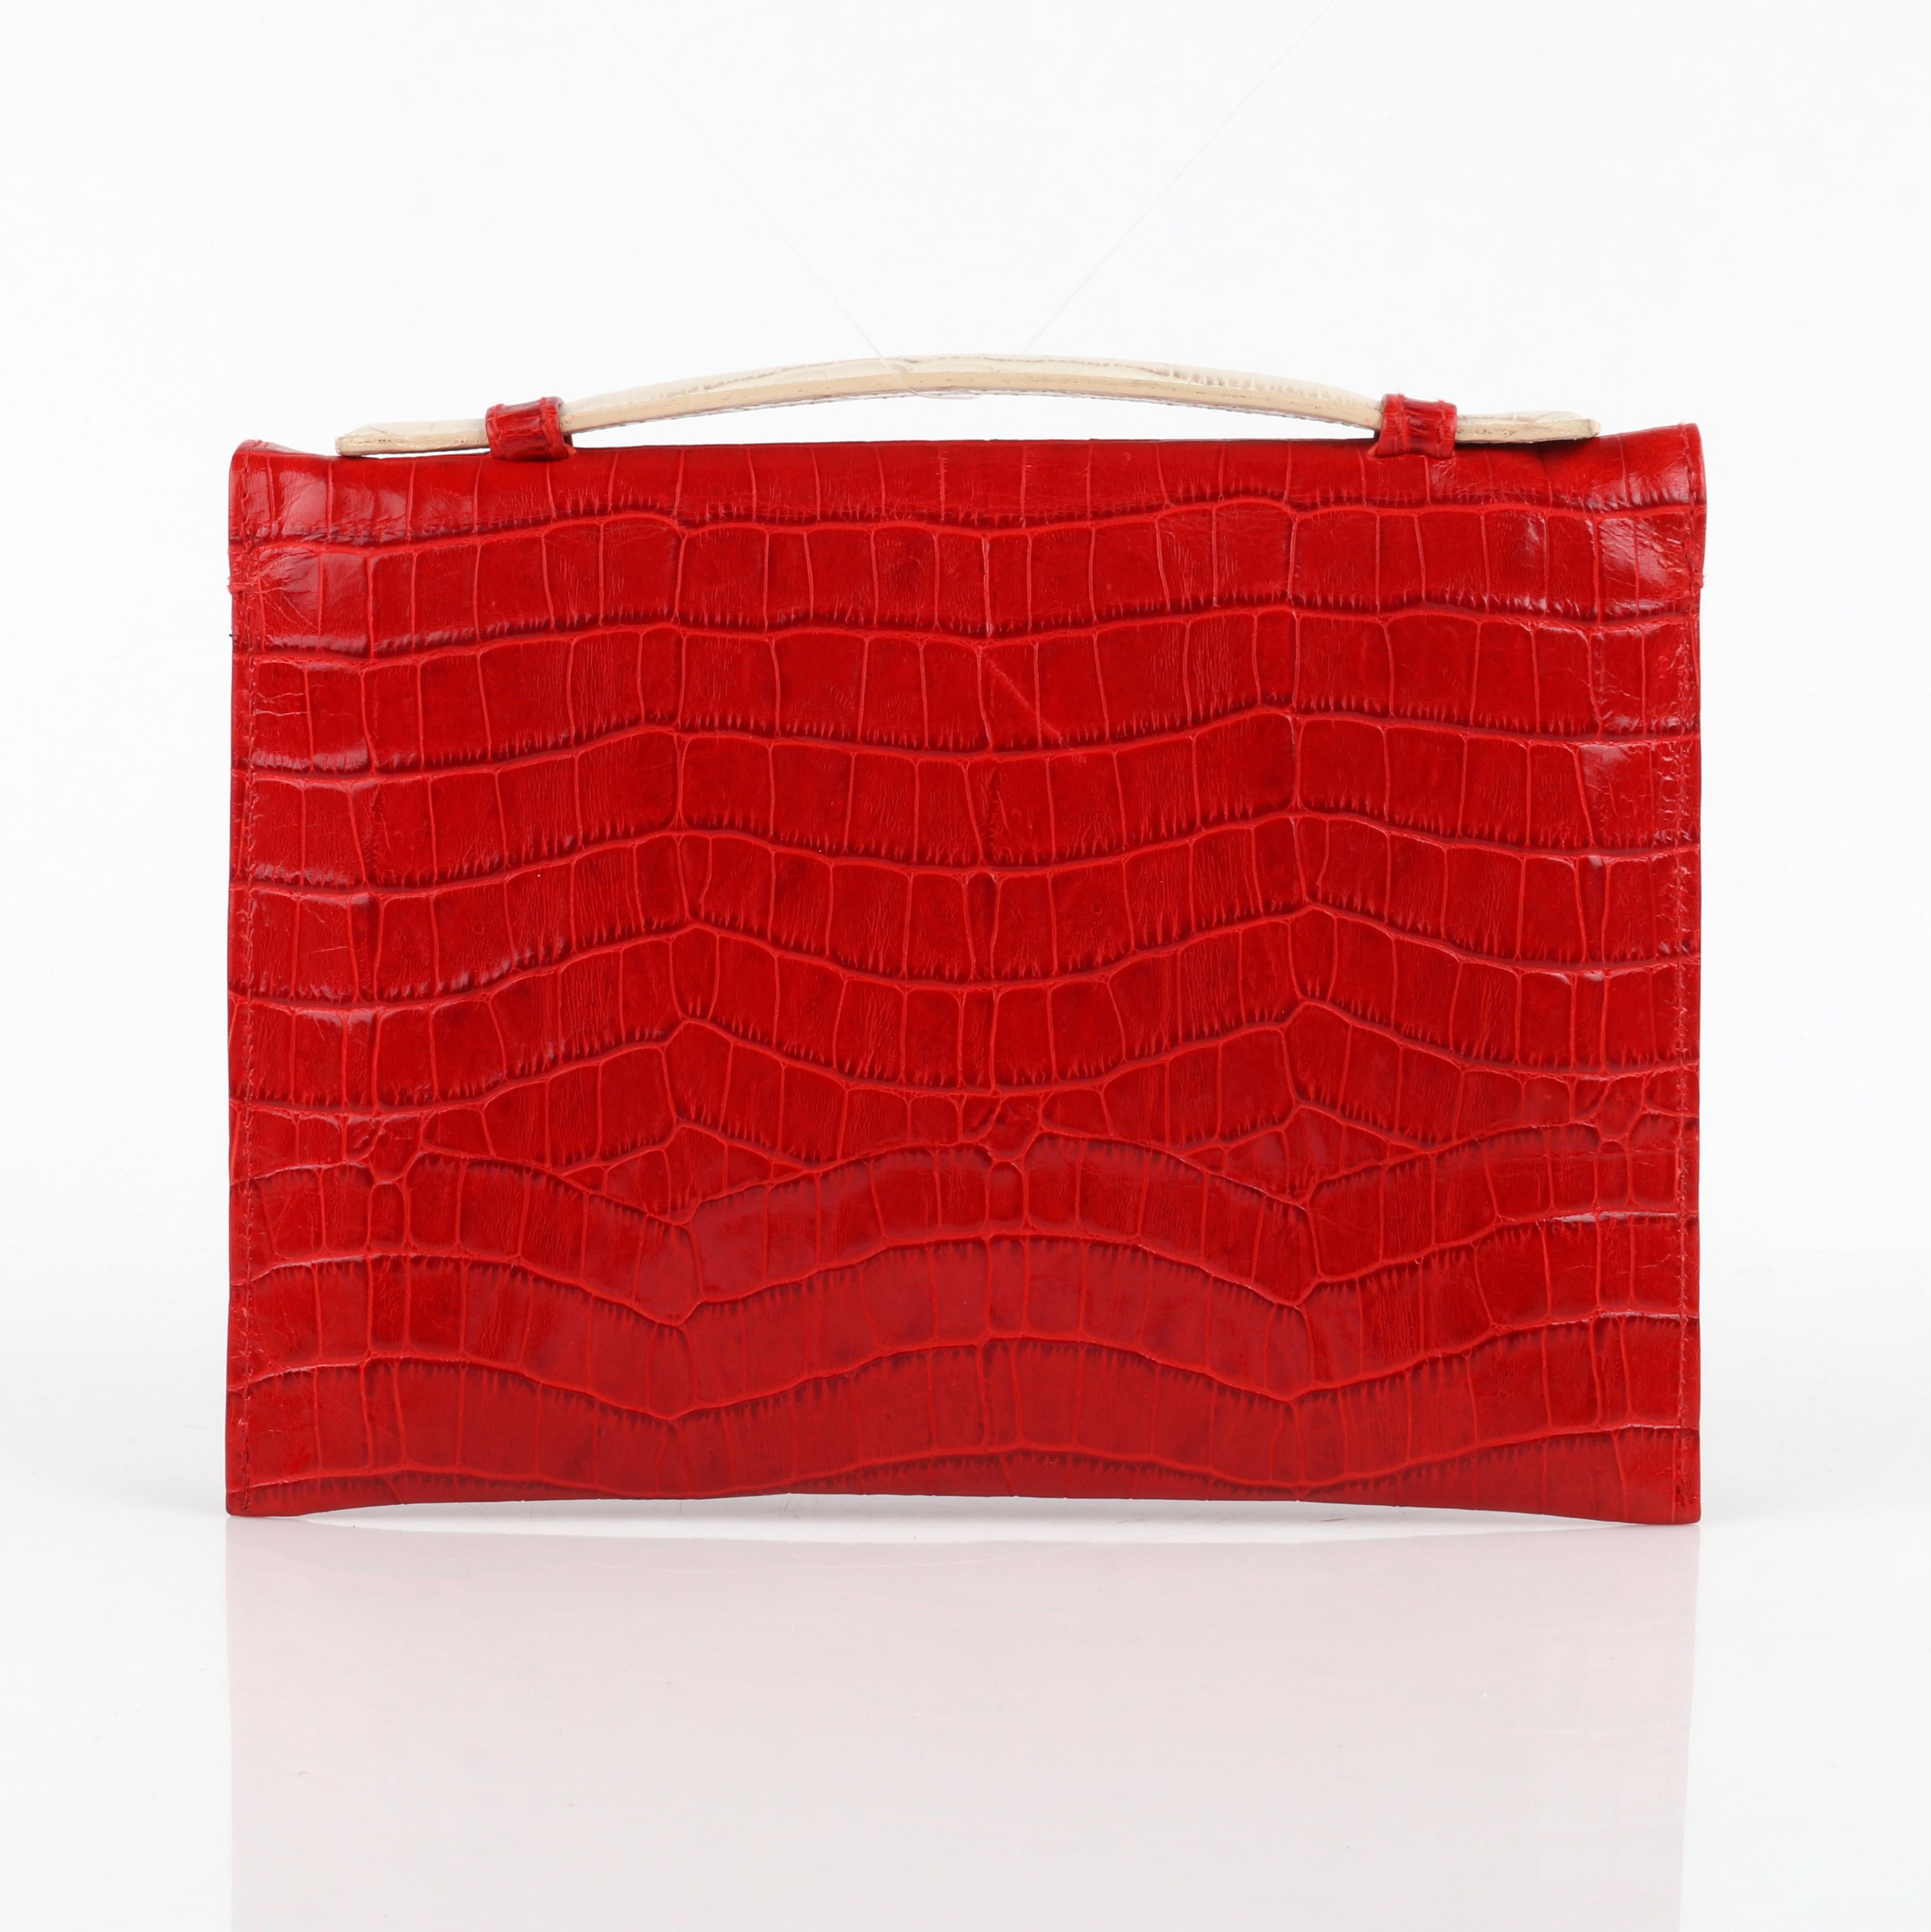 PONTINE PAUS c. 2008 Red Ivory Crocodile Leather Flap Fold Clutch Purse Bag RARE In Good Condition For Sale In Thiensville, WI